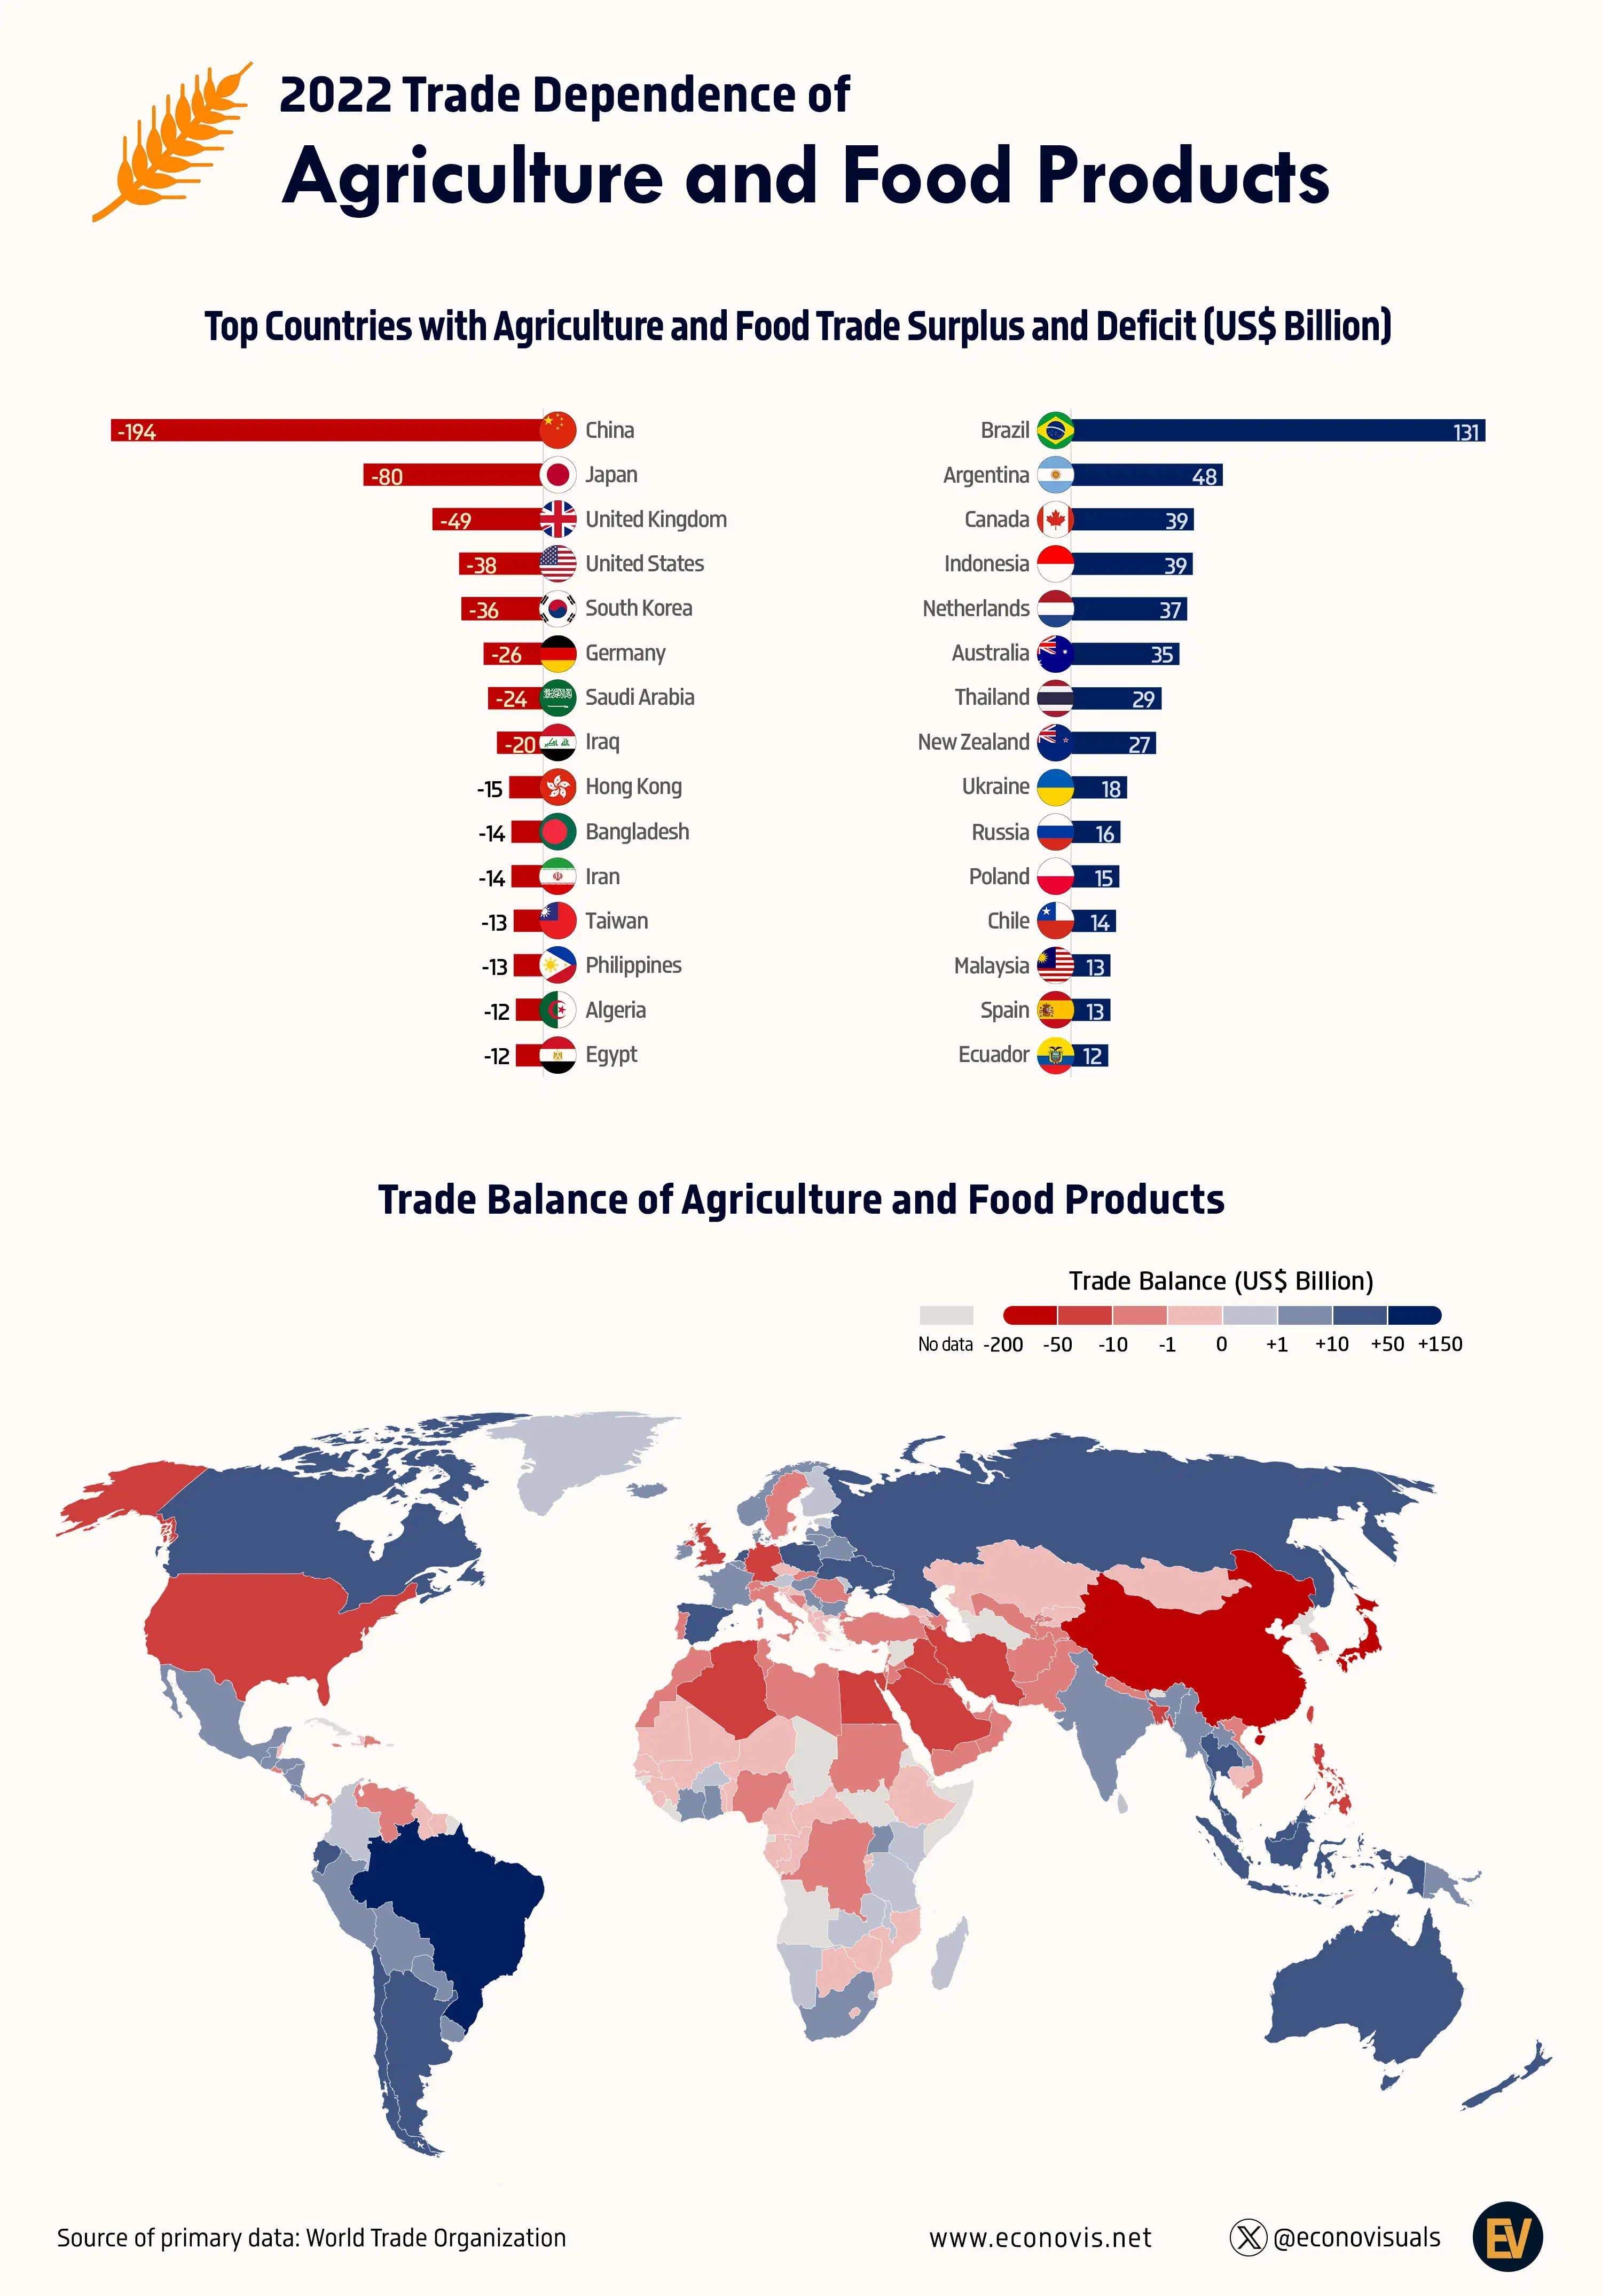 📈 Global Trade Dependence of Agriculture and Food Products